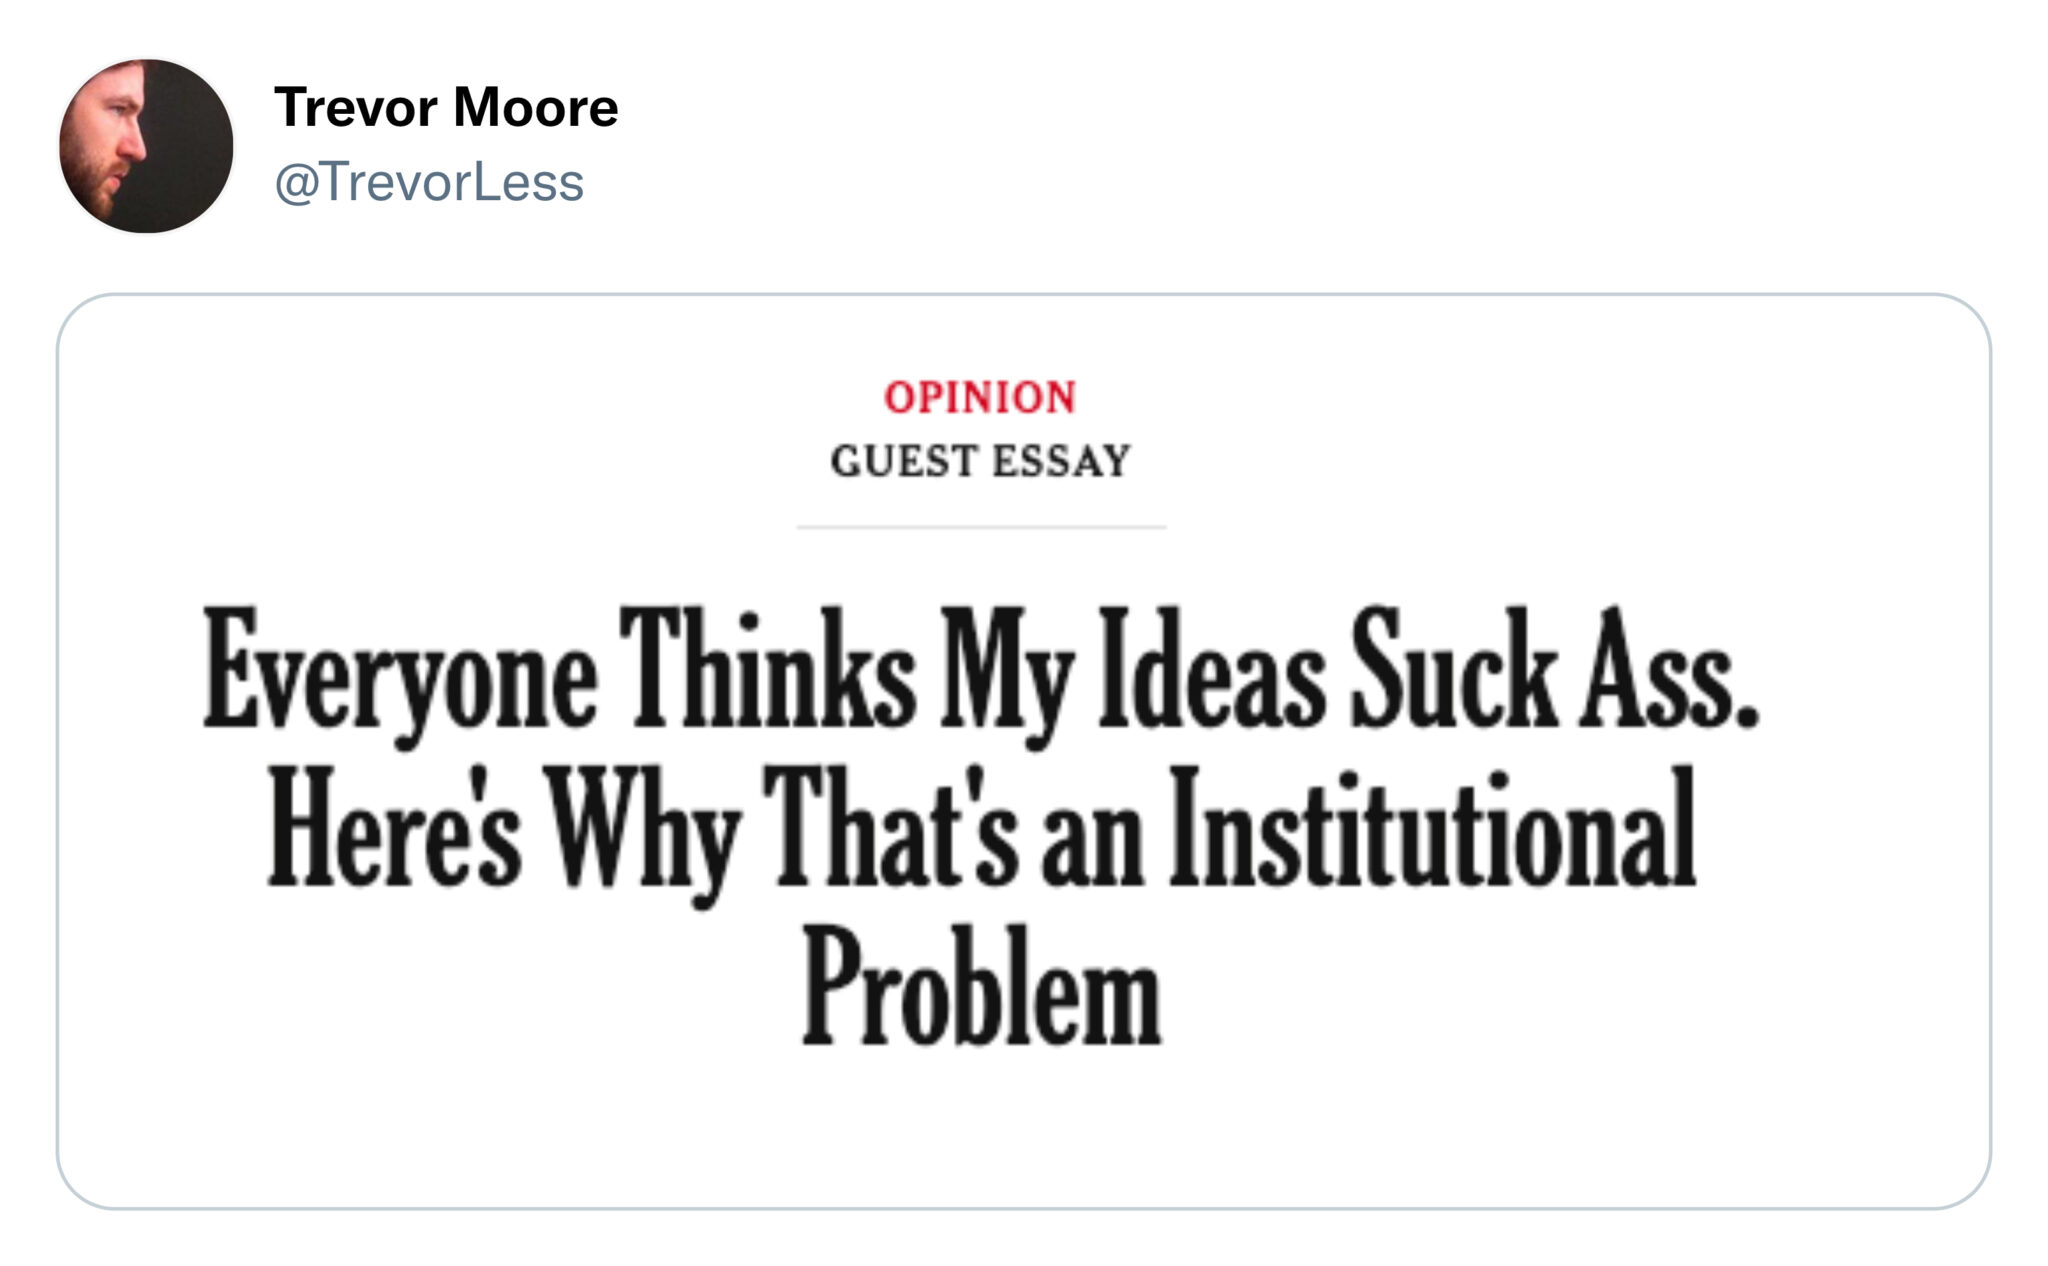 funny tweets - love facebook - Trevor Moore Opinion Guest Essay Everyone Thinks My Ideas Suck Ass. Here's Why That's an Institutional Problem